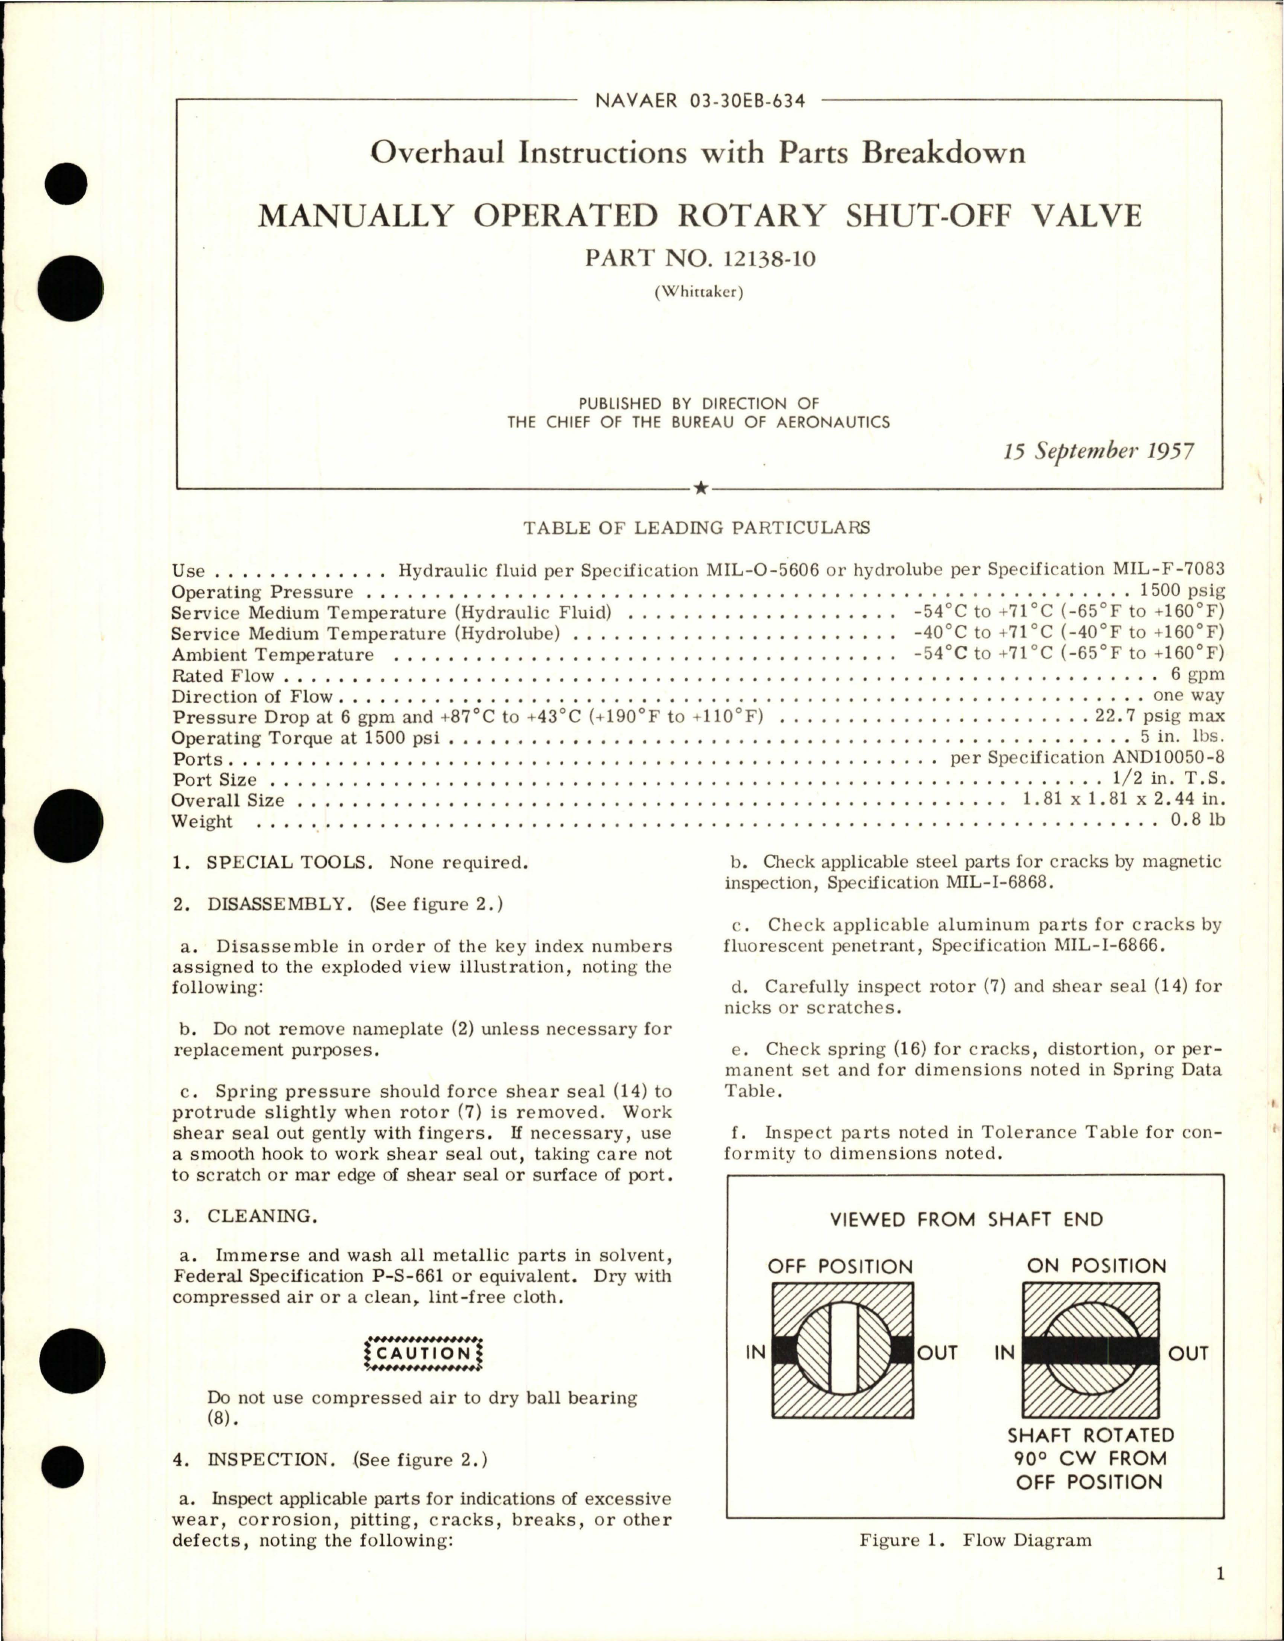 Sample page 1 from AirCorps Library document: Overhaul Instructions with Parts Breakdown for Manually Operated Rotary Shut-Off Valve - Part 12138-10